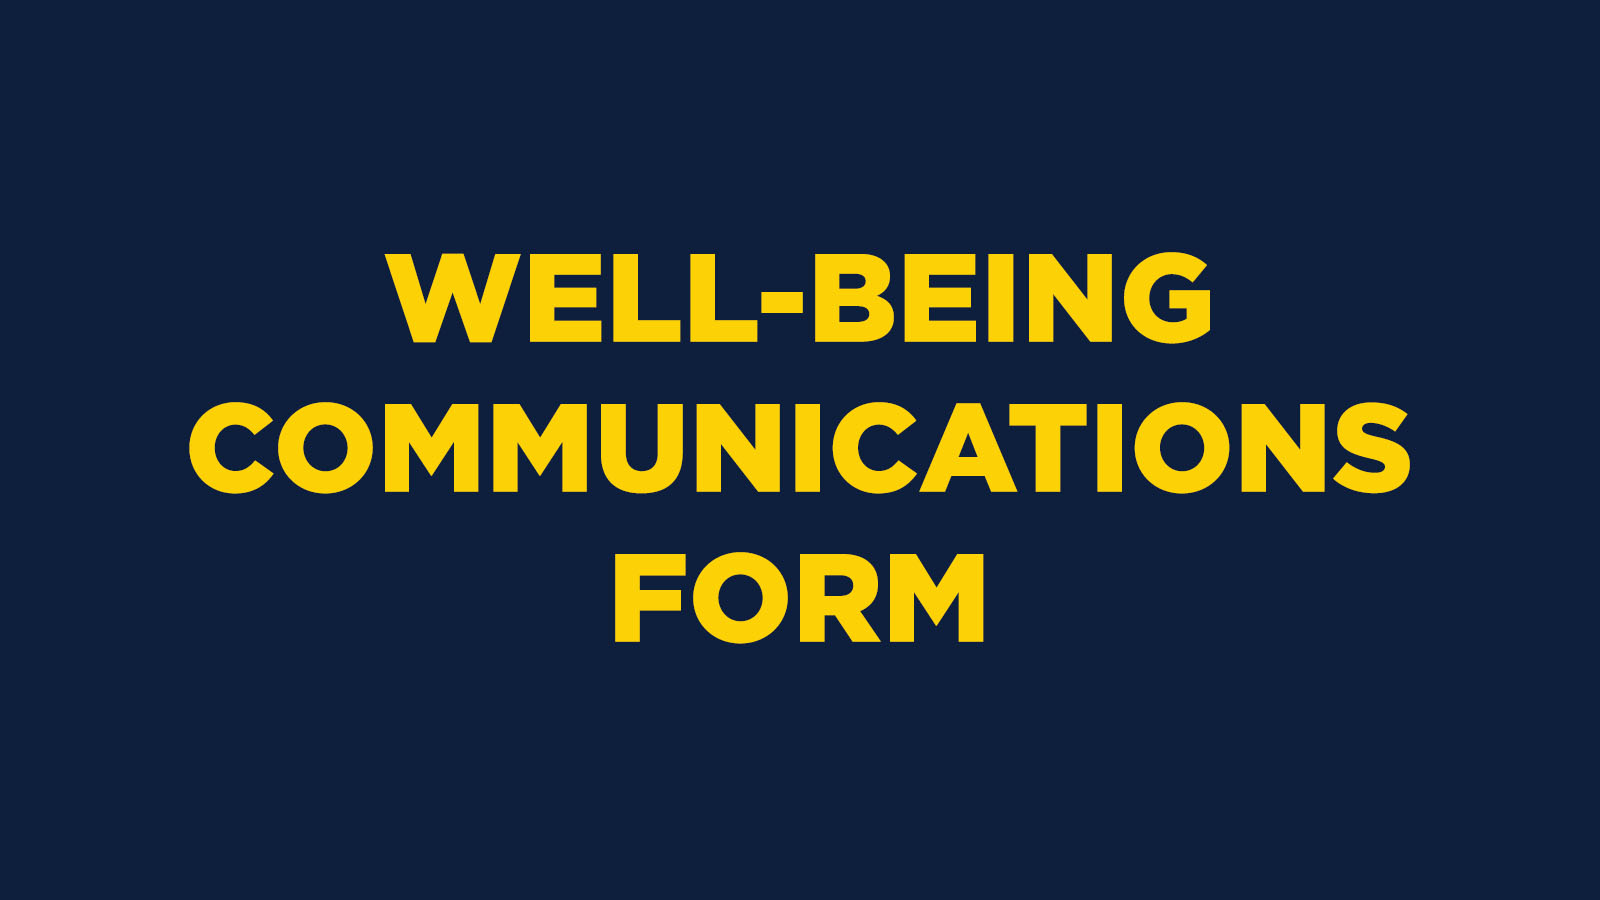 Well-Being Communications Form